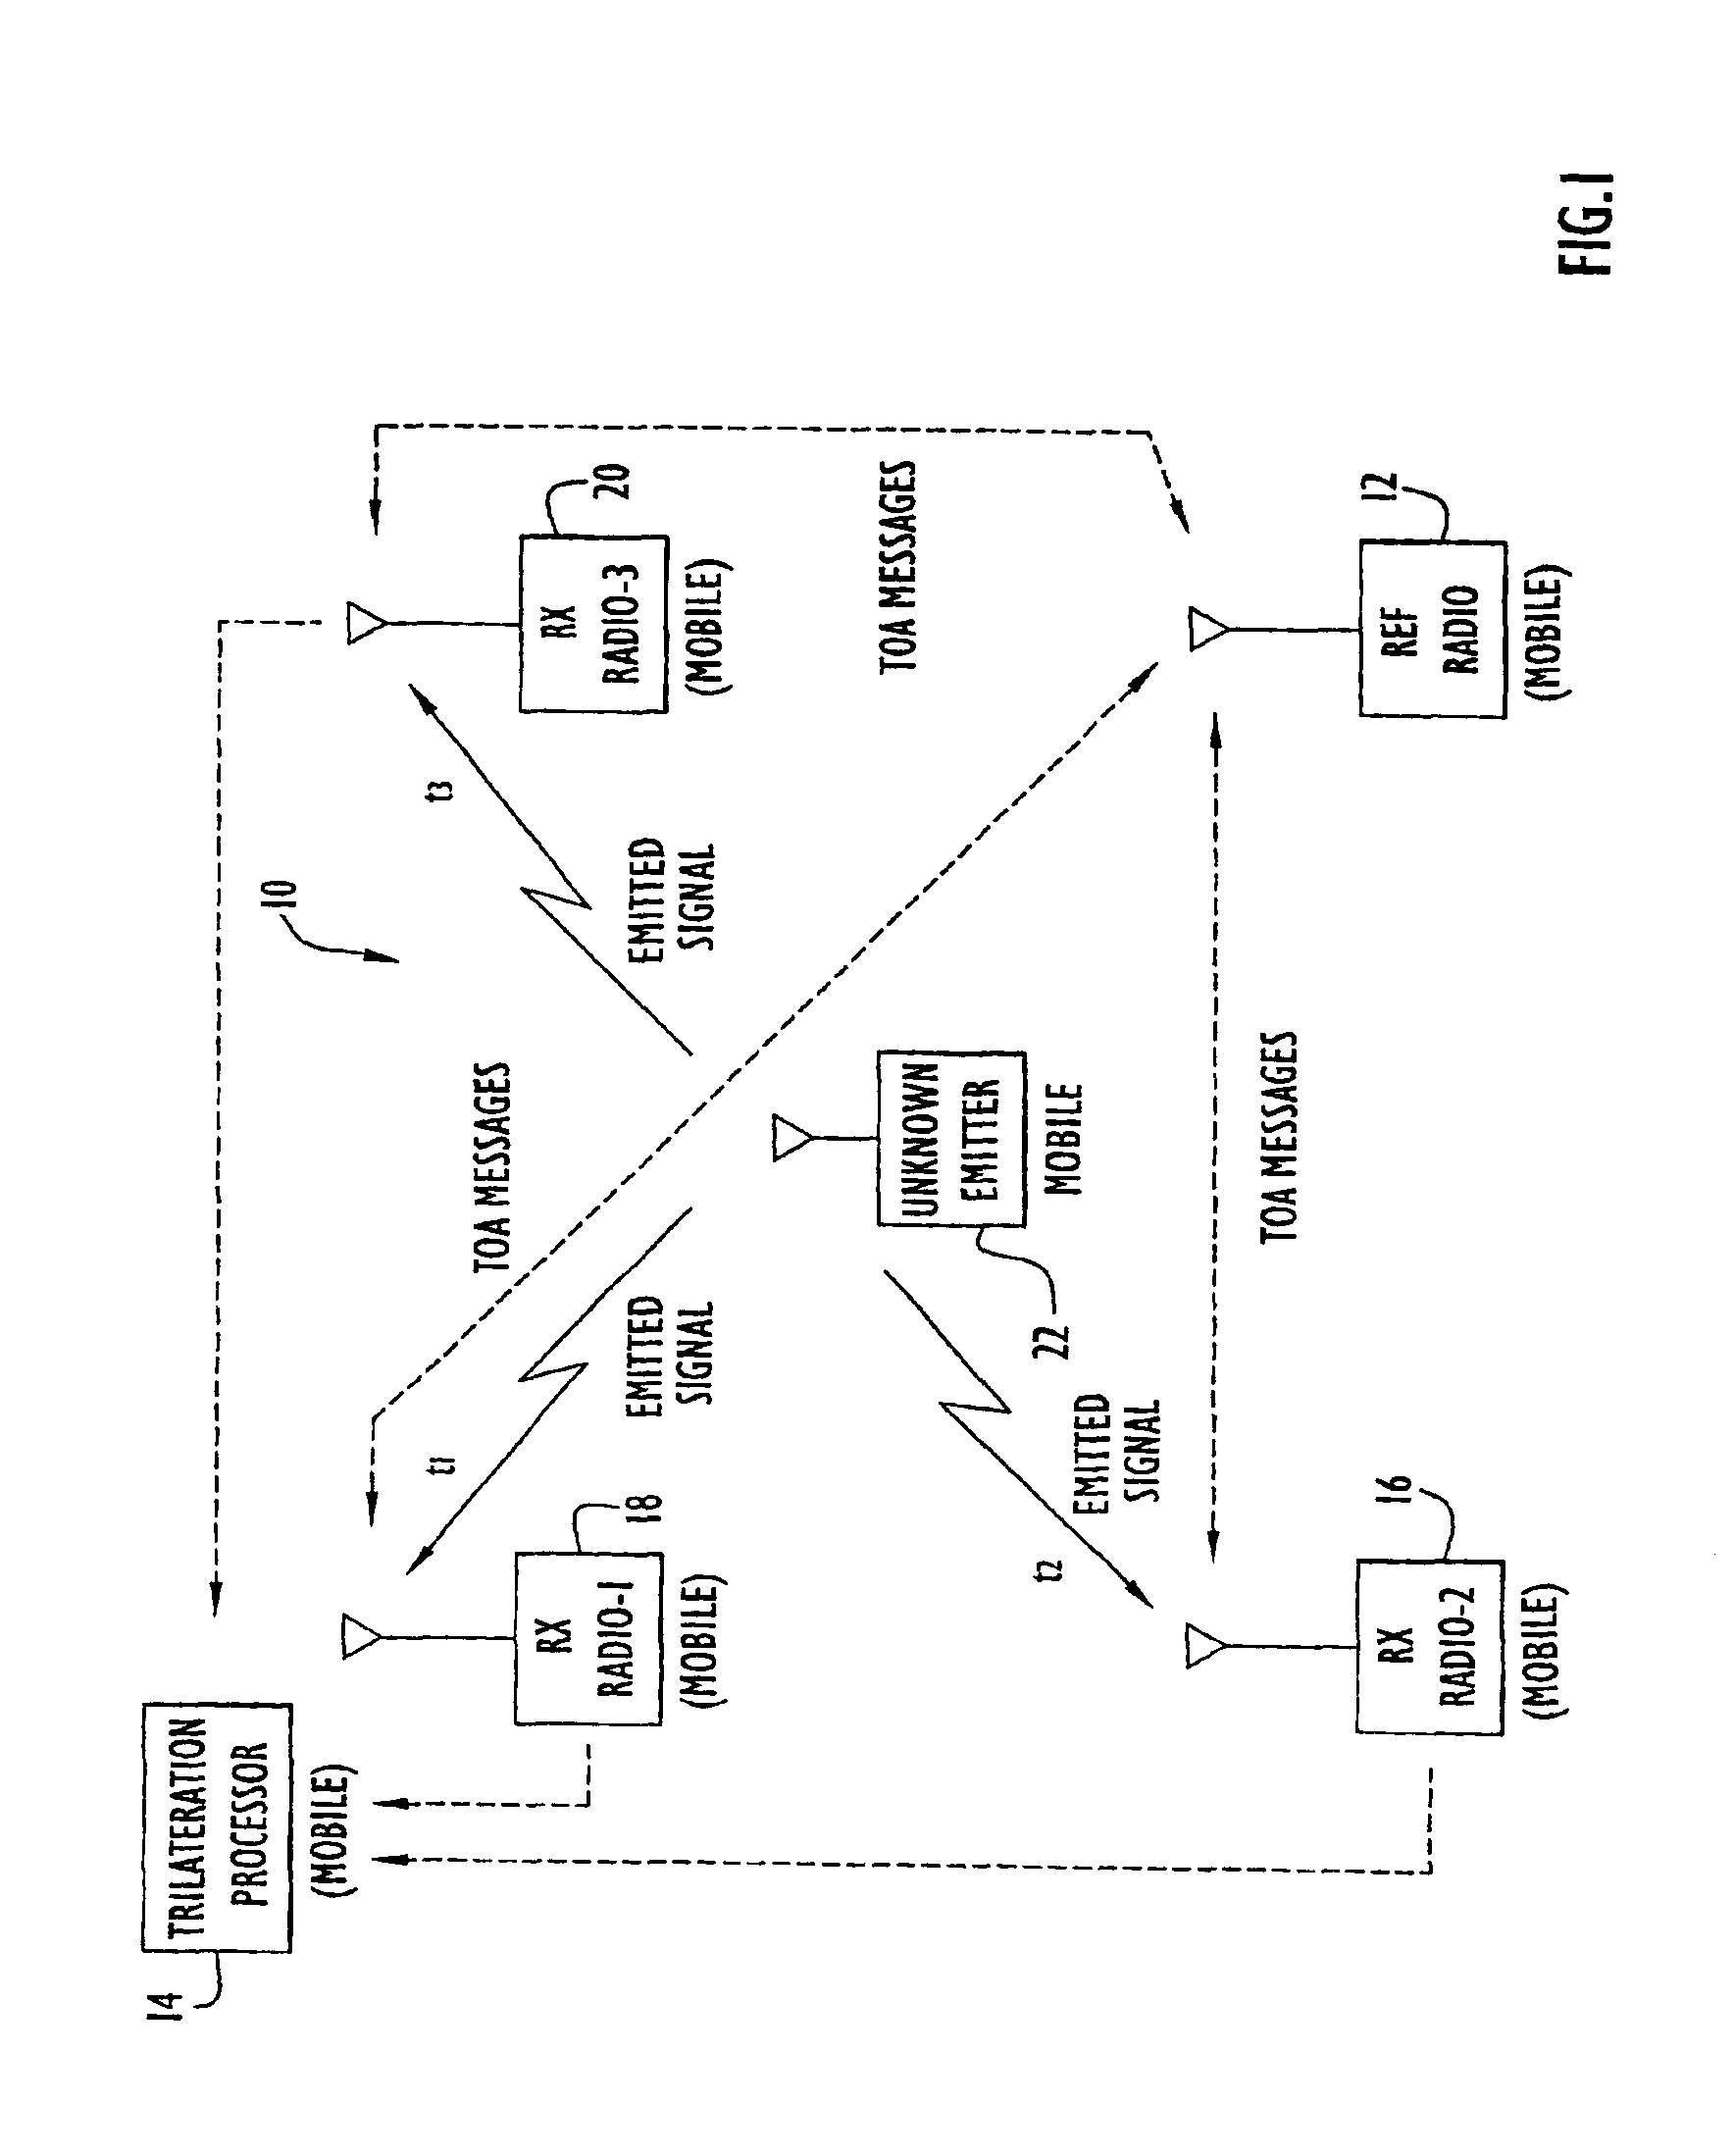 System for determining position of an emitter